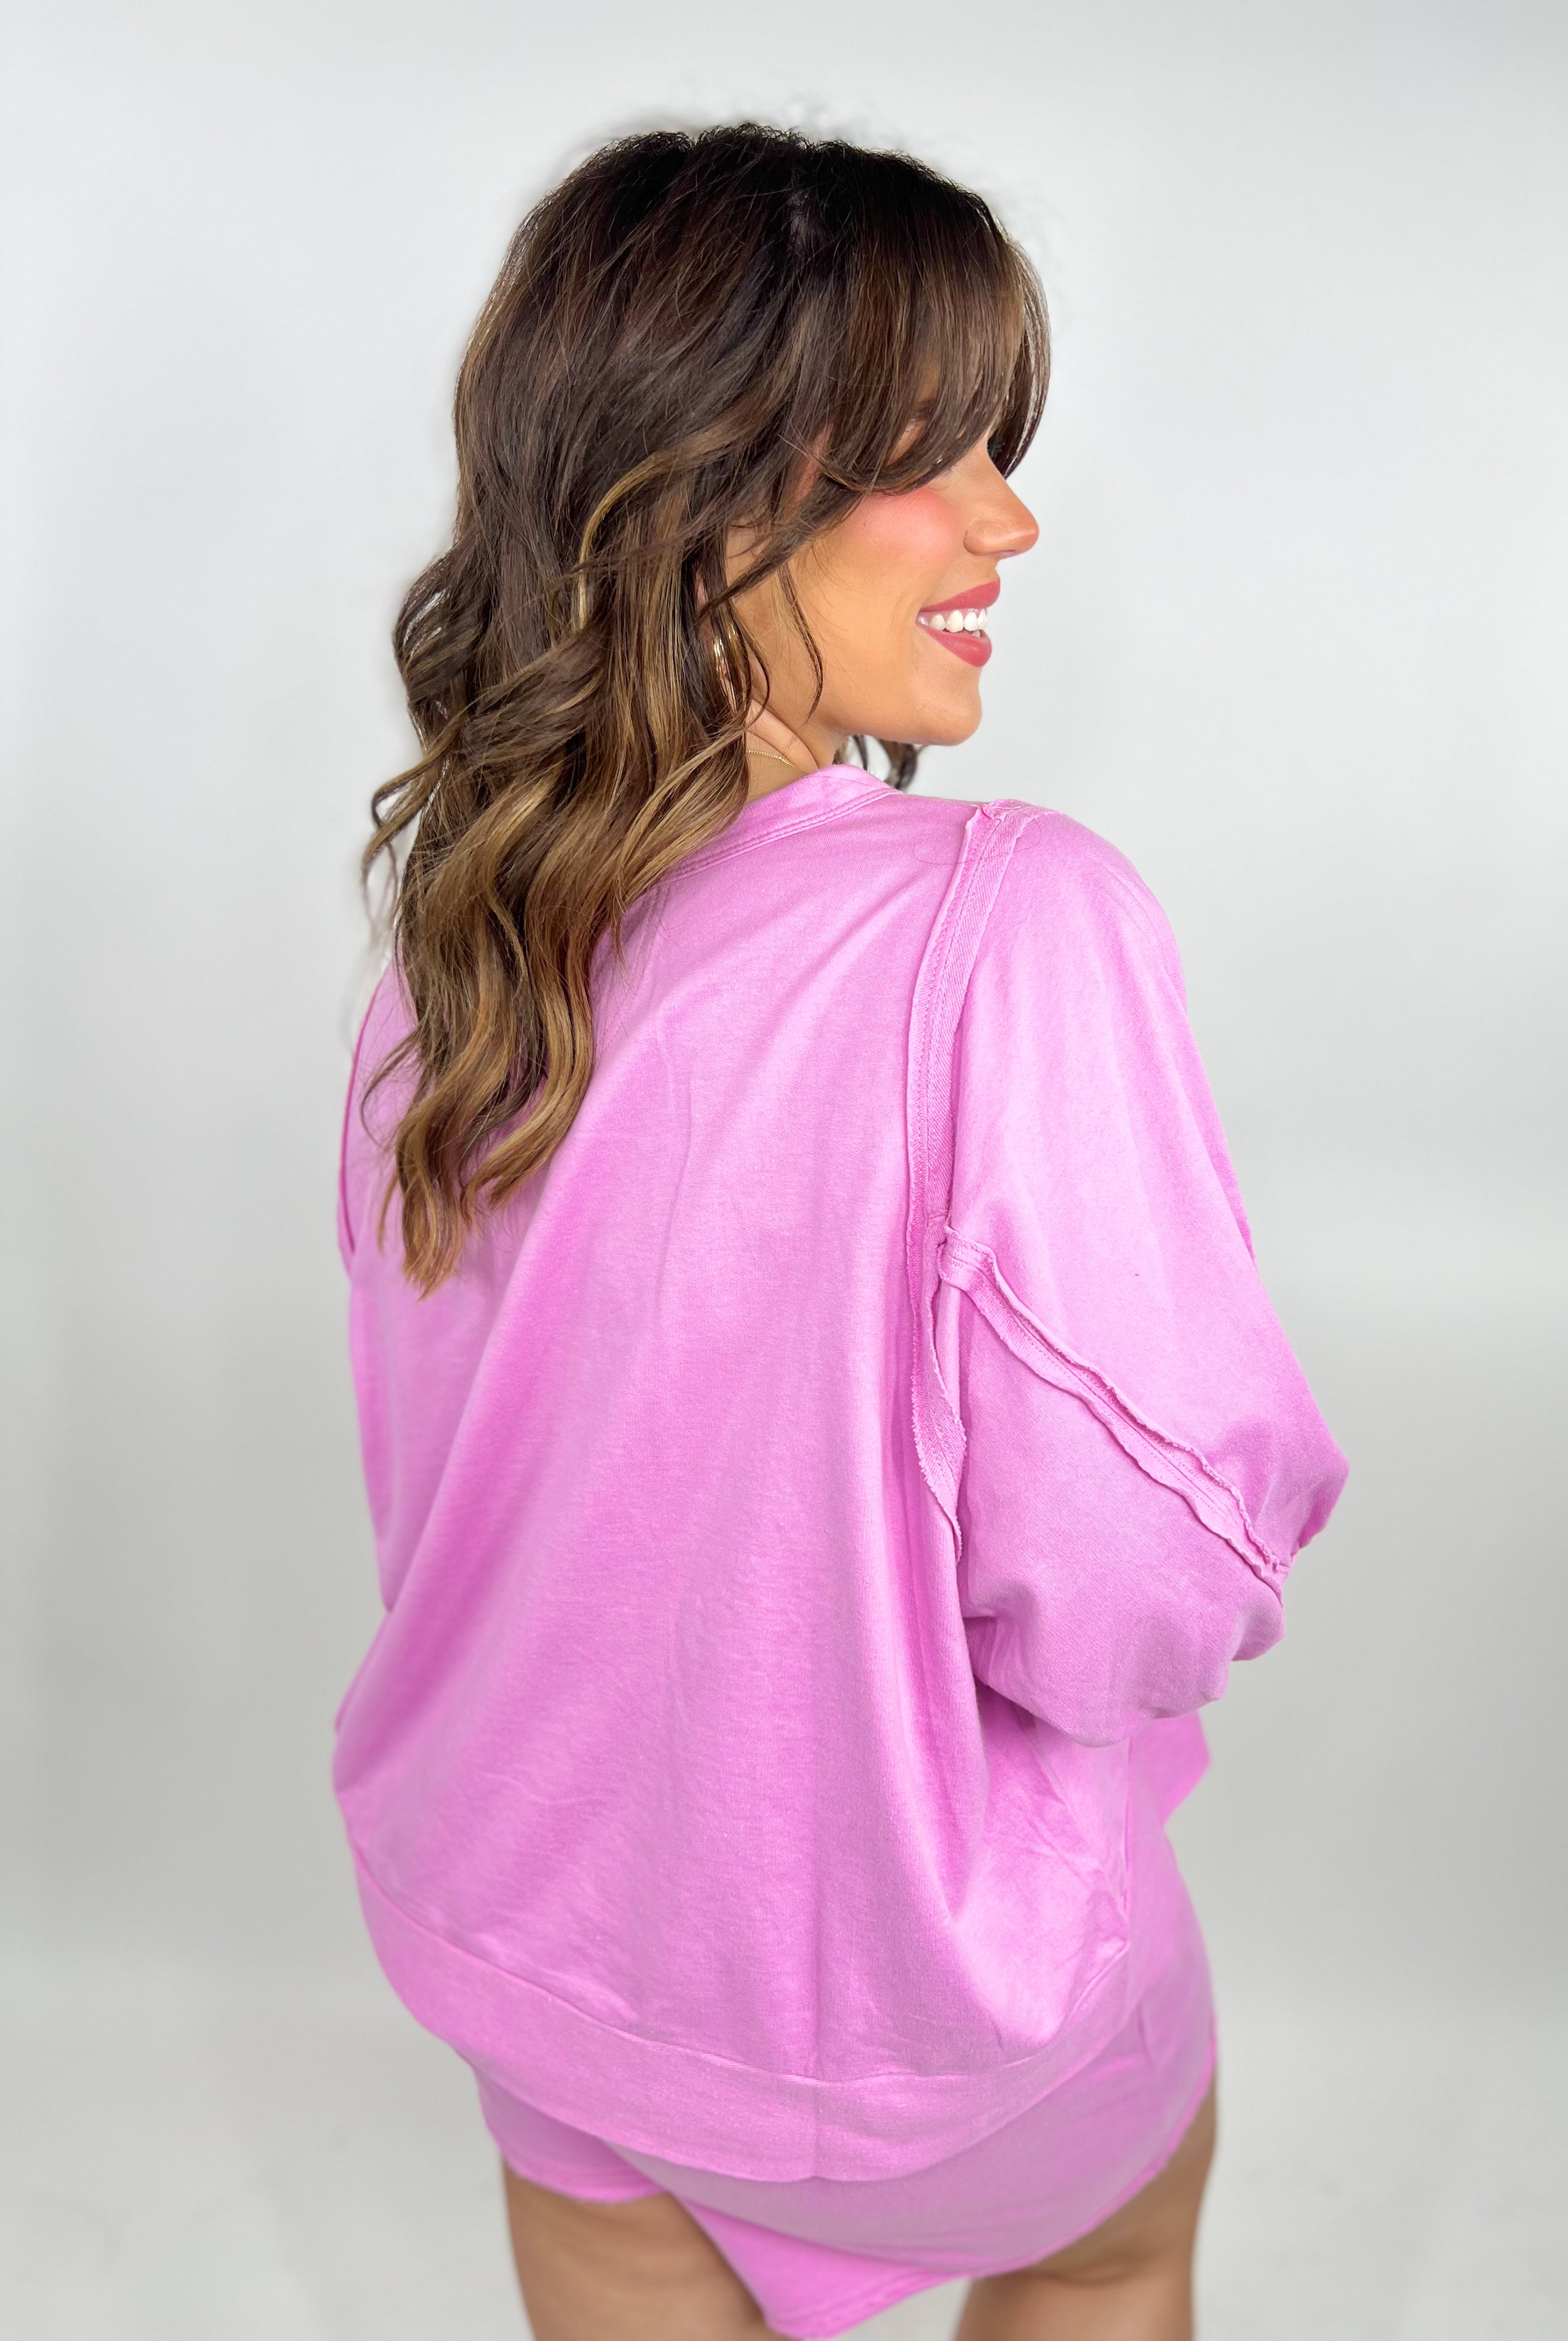 RESTOCK: At Ease Sweatshirt-120 Long Sleeve Tops-Oddi-Heathered Boho Boutique, Women's Fashion and Accessories in Palmetto, FL